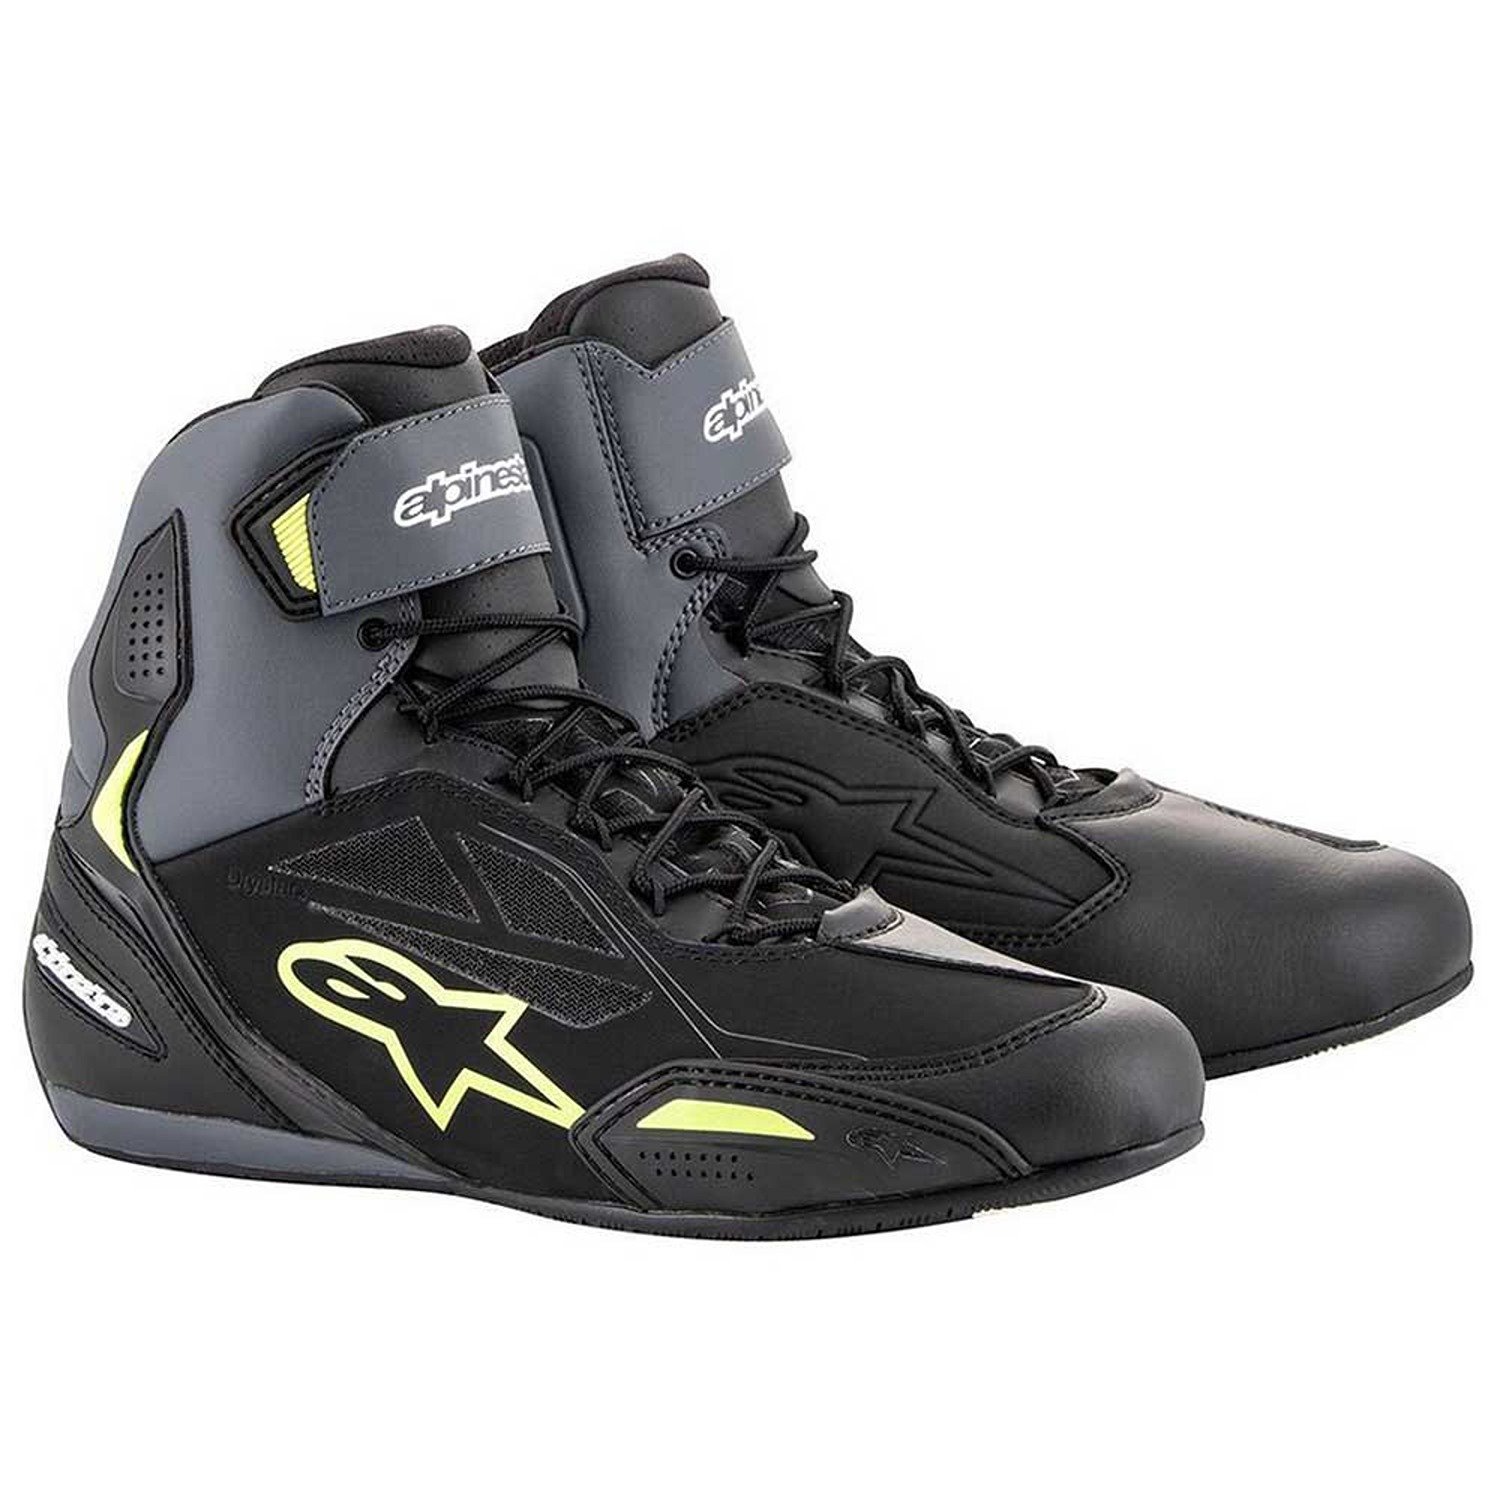 Image of Alpinestars Faster-3 Shoes Black Yellow Fluo Taille US 135